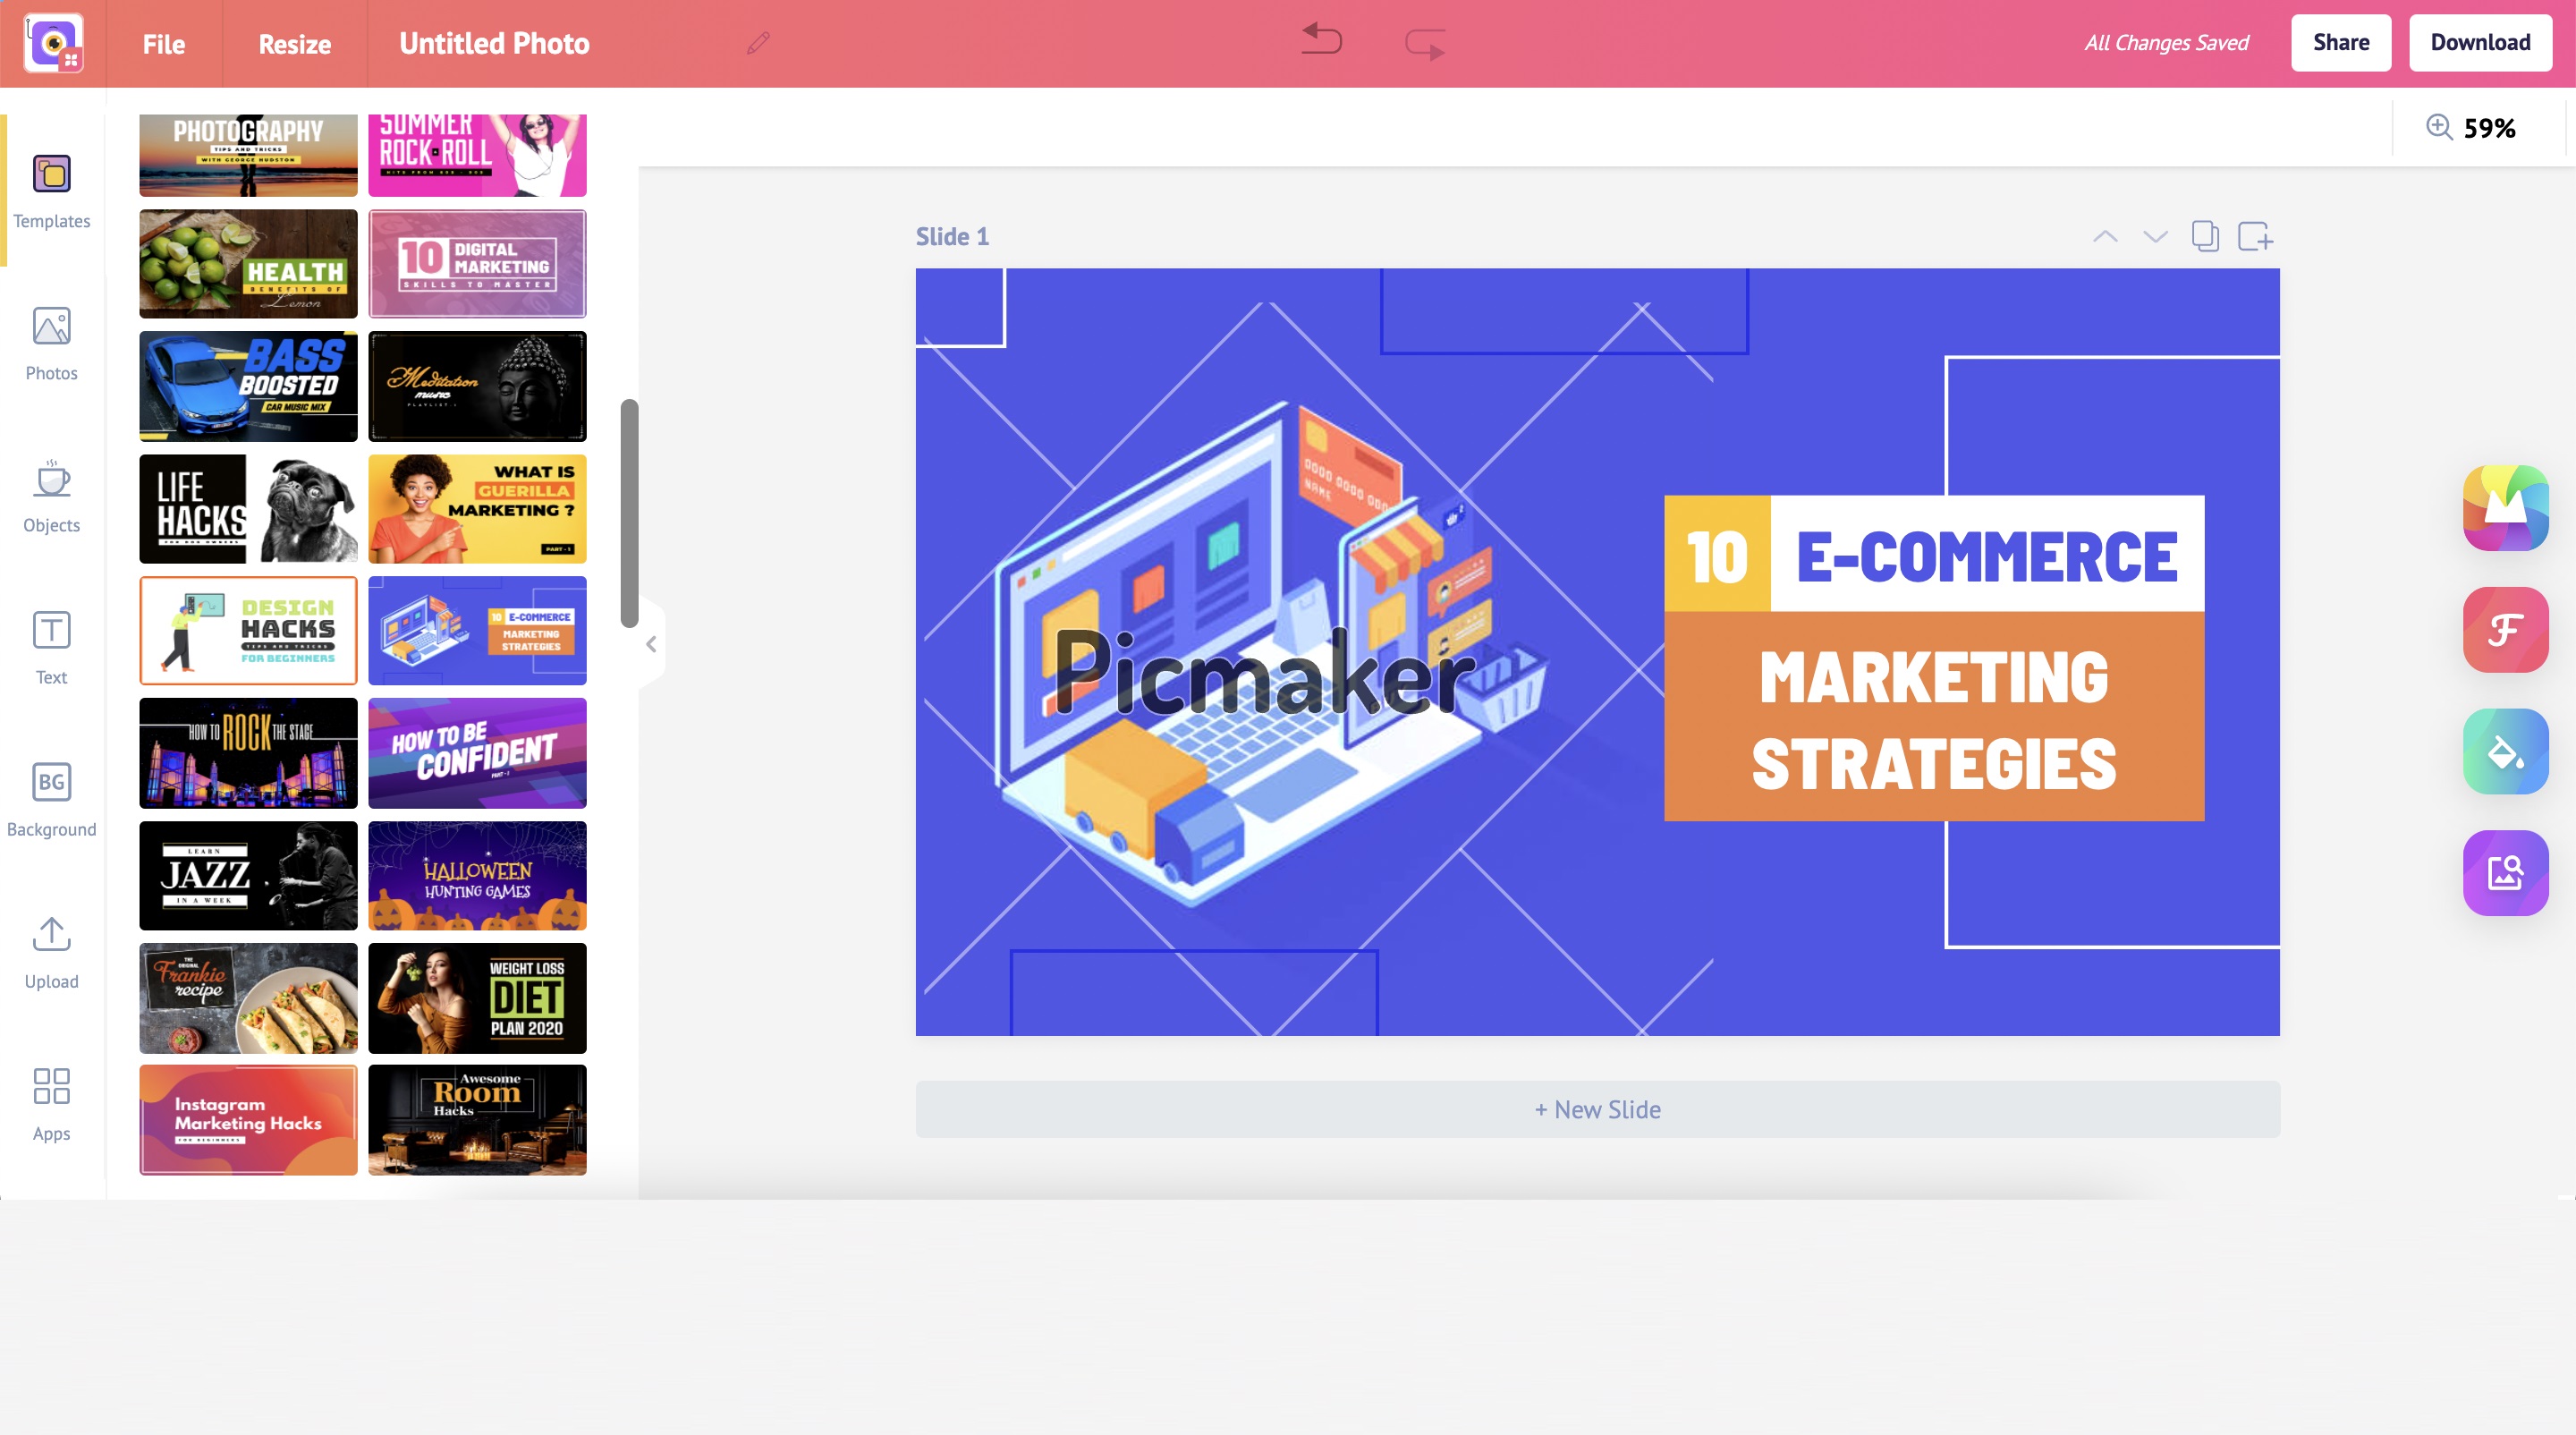 Find detailed information about Picmaker